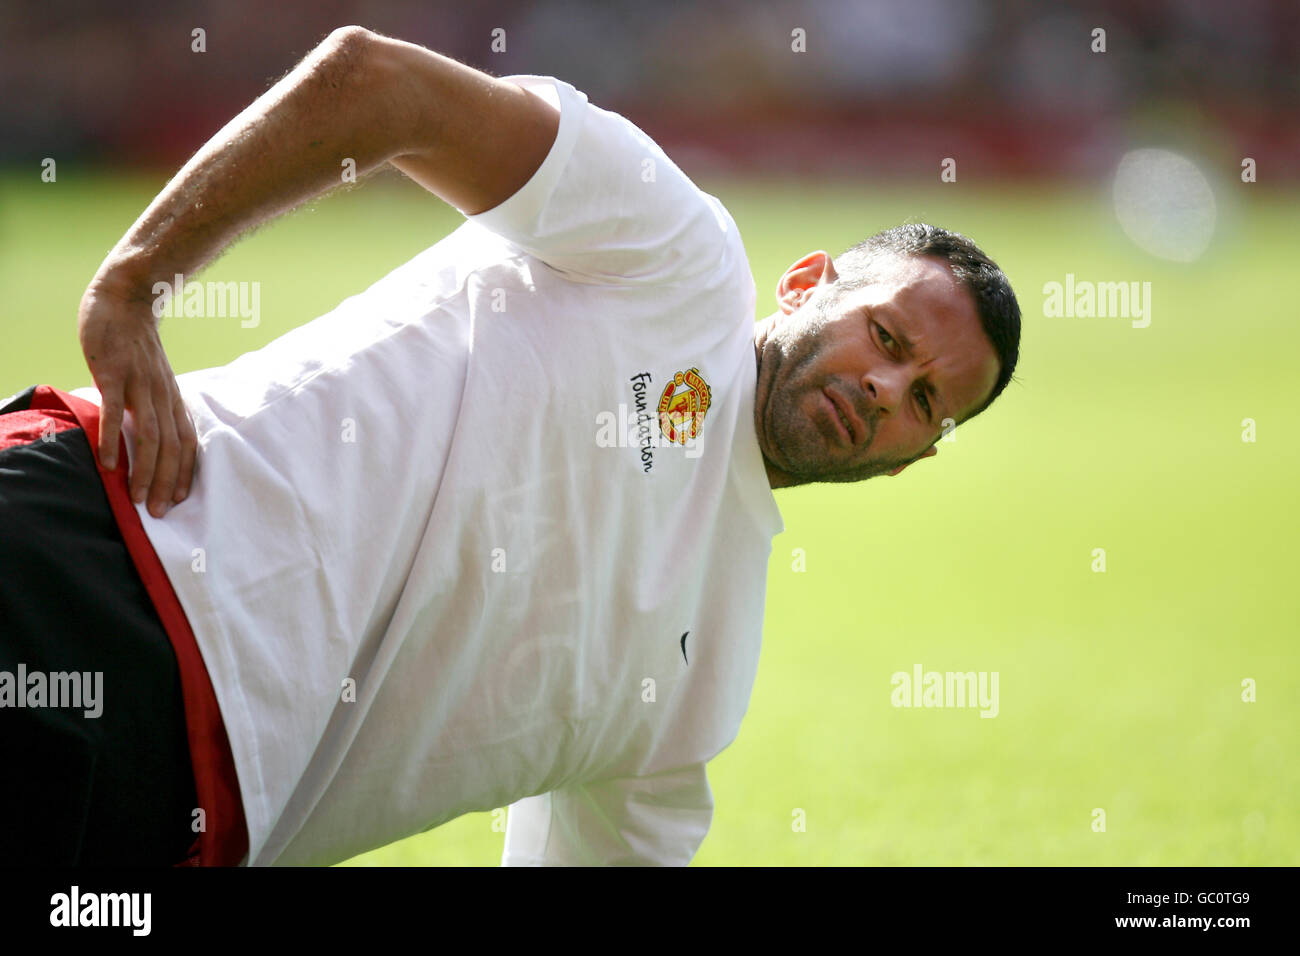 Football - Manchester United Training session - Old Trafford. Ryan Giggs, Manchester United Banque D'Images